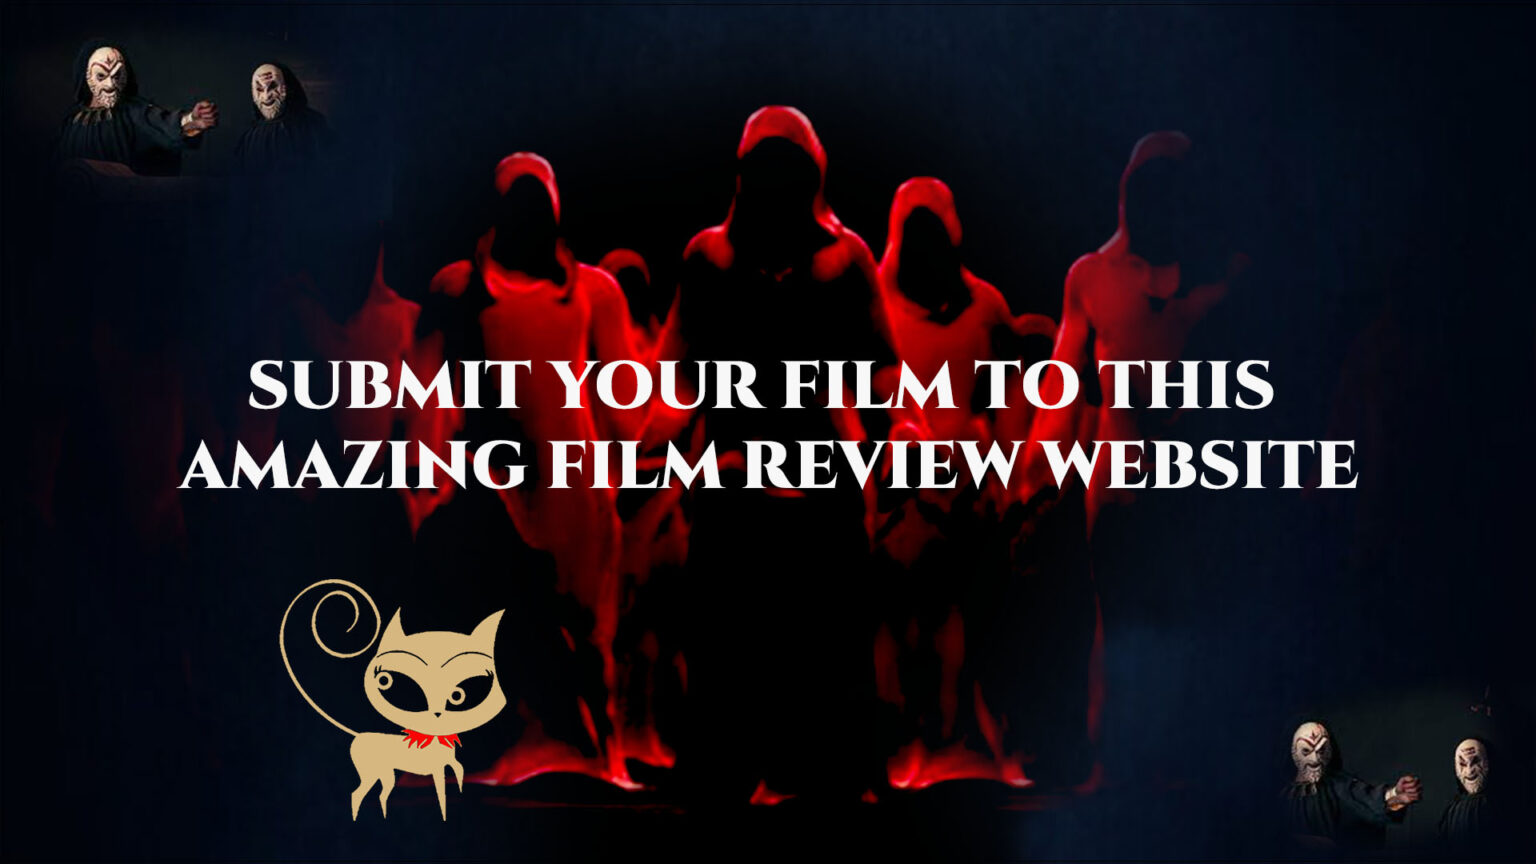 SUBMIT YOUR FILM TO THIS AMAZING FILM REVIEW WEBSITE